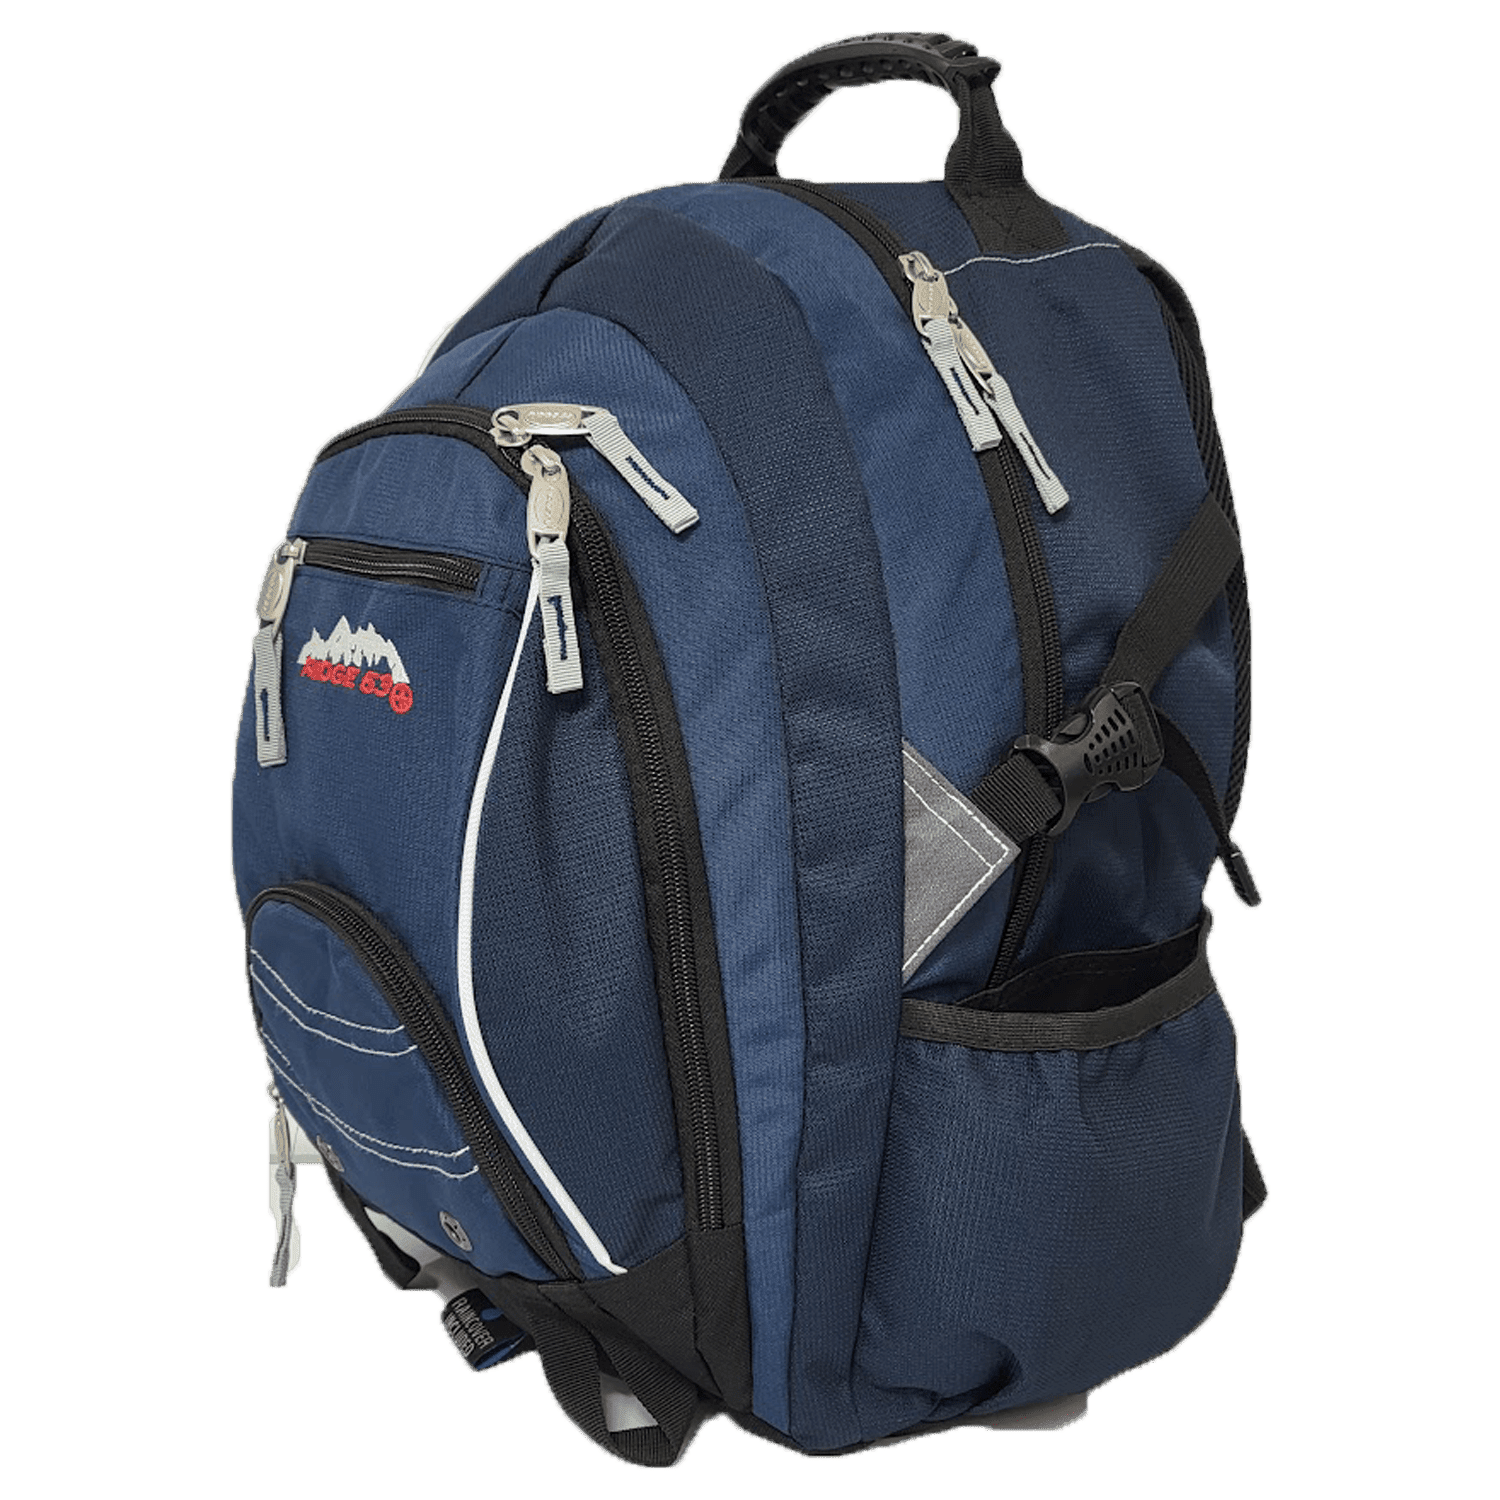 Sportech Ridge 53 – Bolton Backpack - Navy 2 Shaws Department Stores